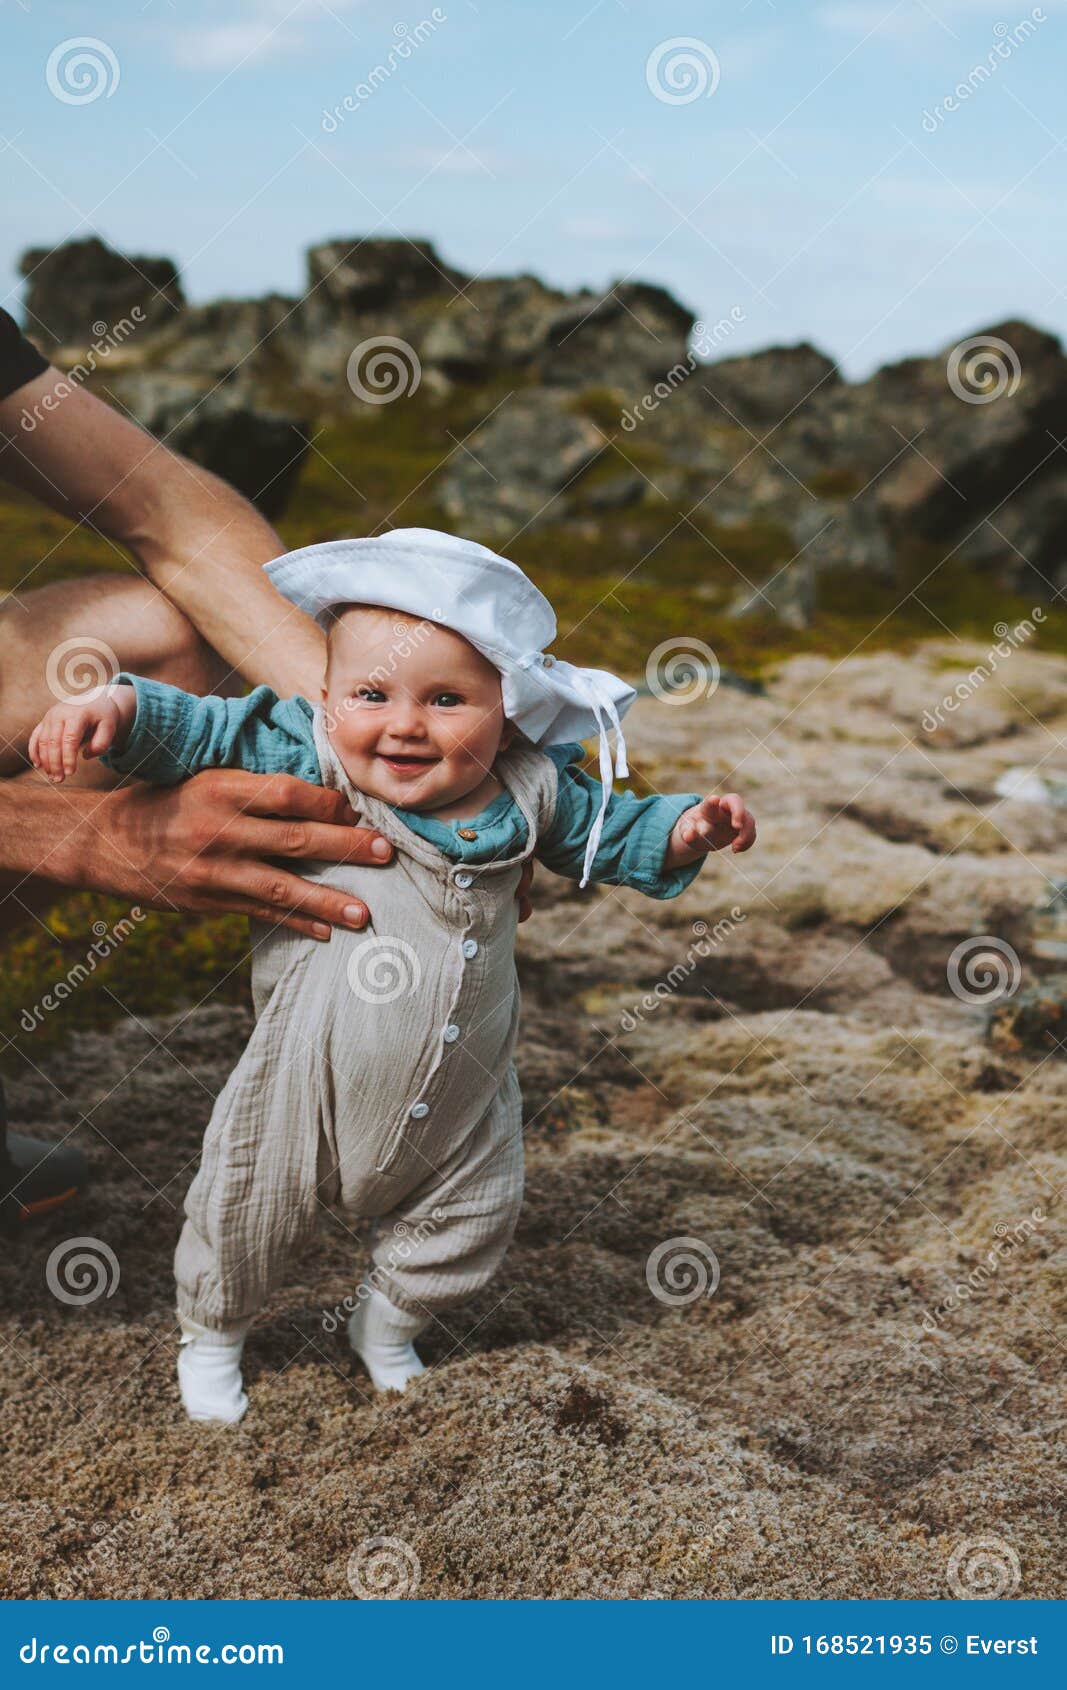 Cute Baby Girl Happy Smiling Standing on Moss Stylish Child Stock ...